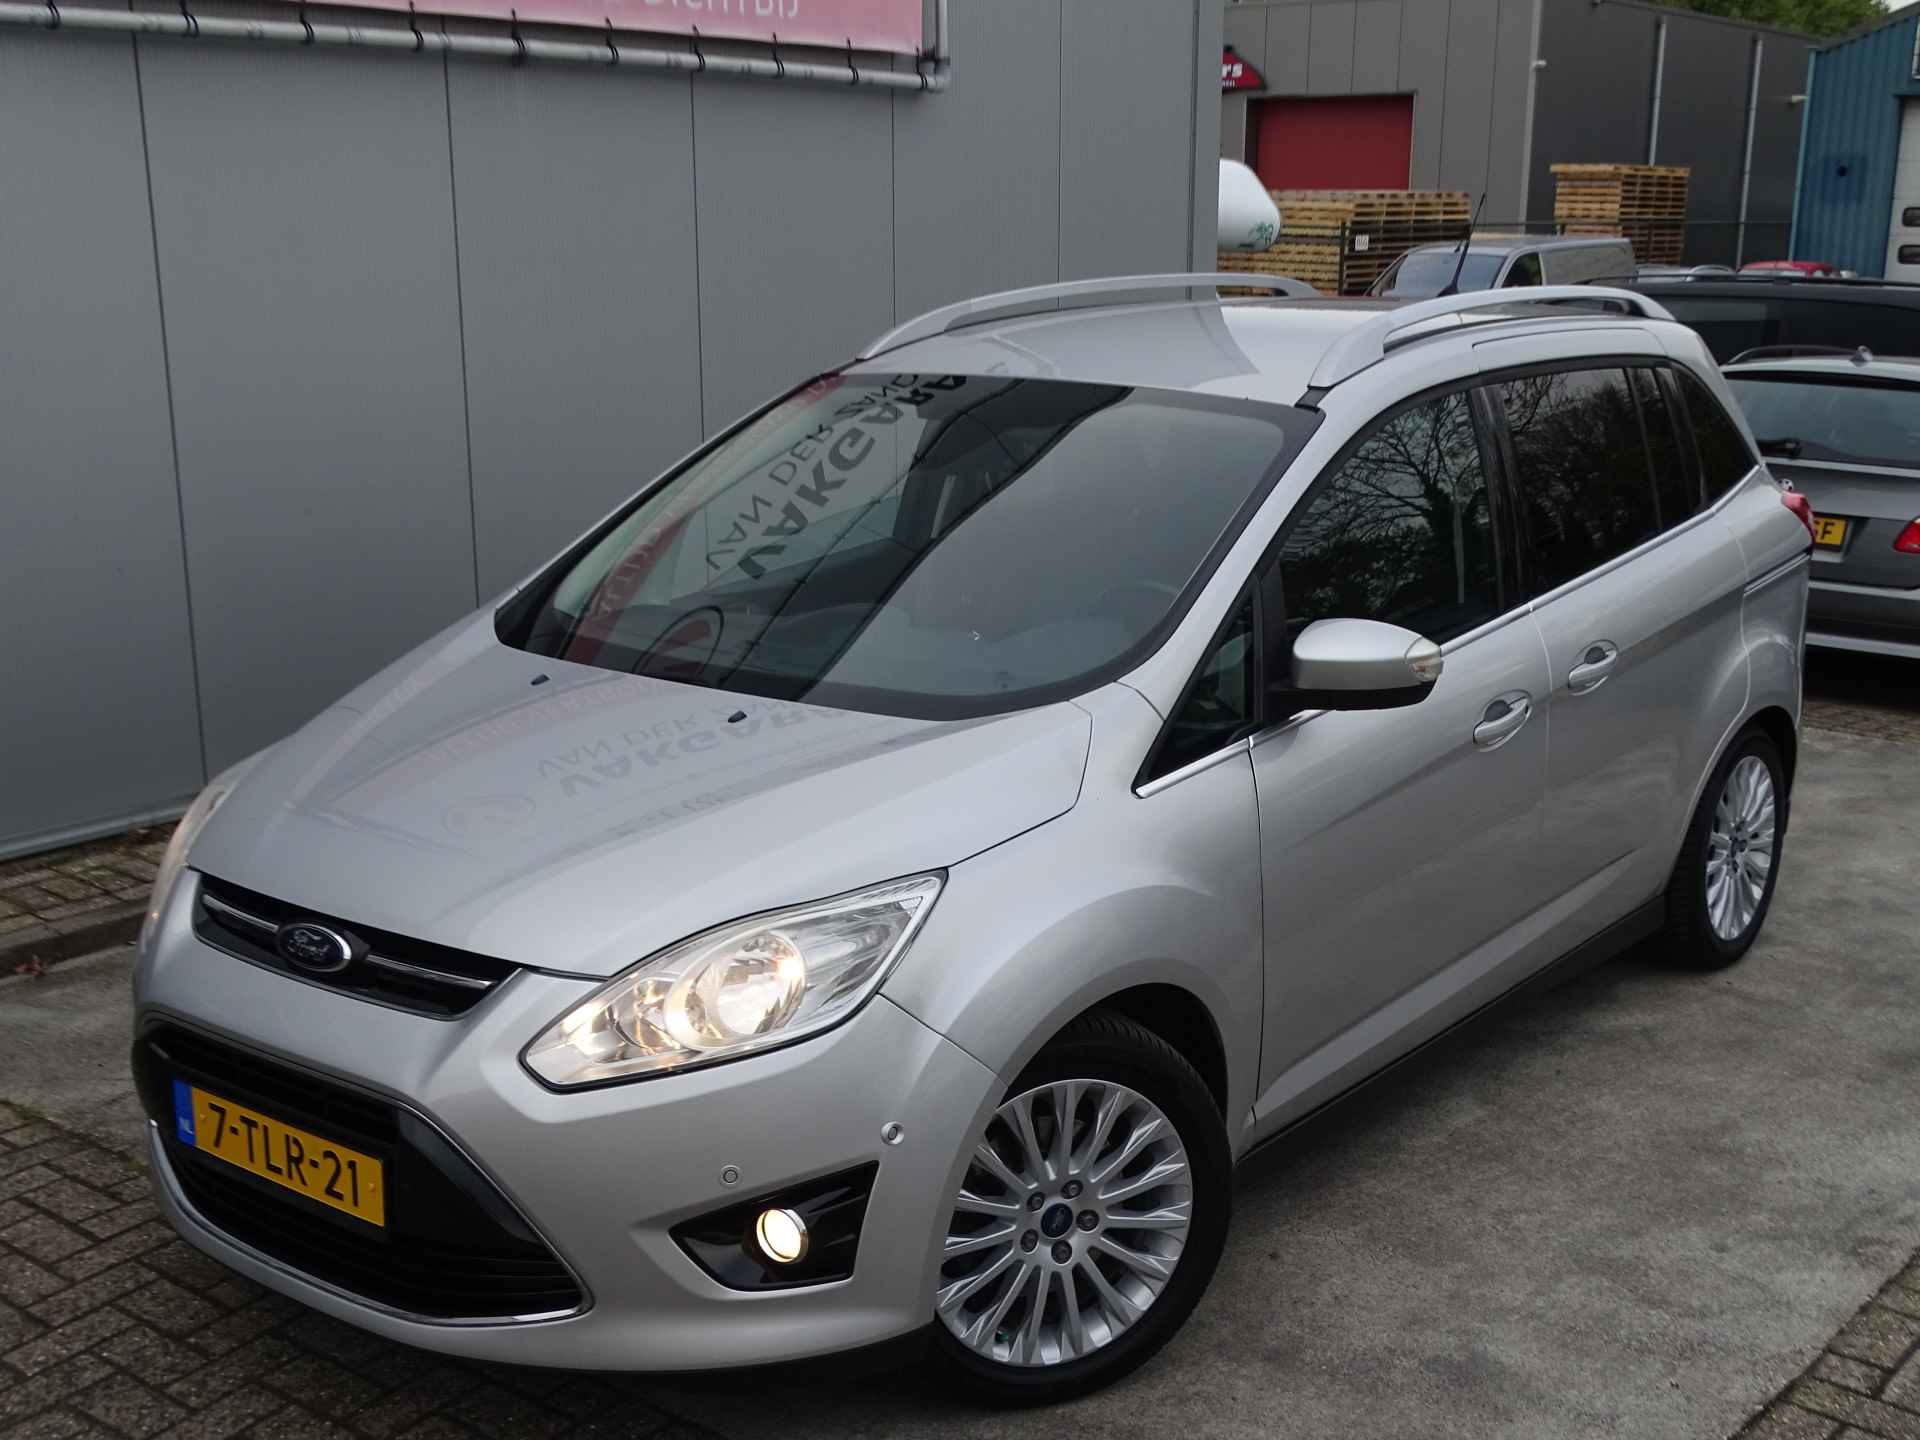 Ford Grand C-Max 1.0 Ed Plus 7 PERSOONS, Cruise Control, Camera, Compleet, NAP! - 11/70